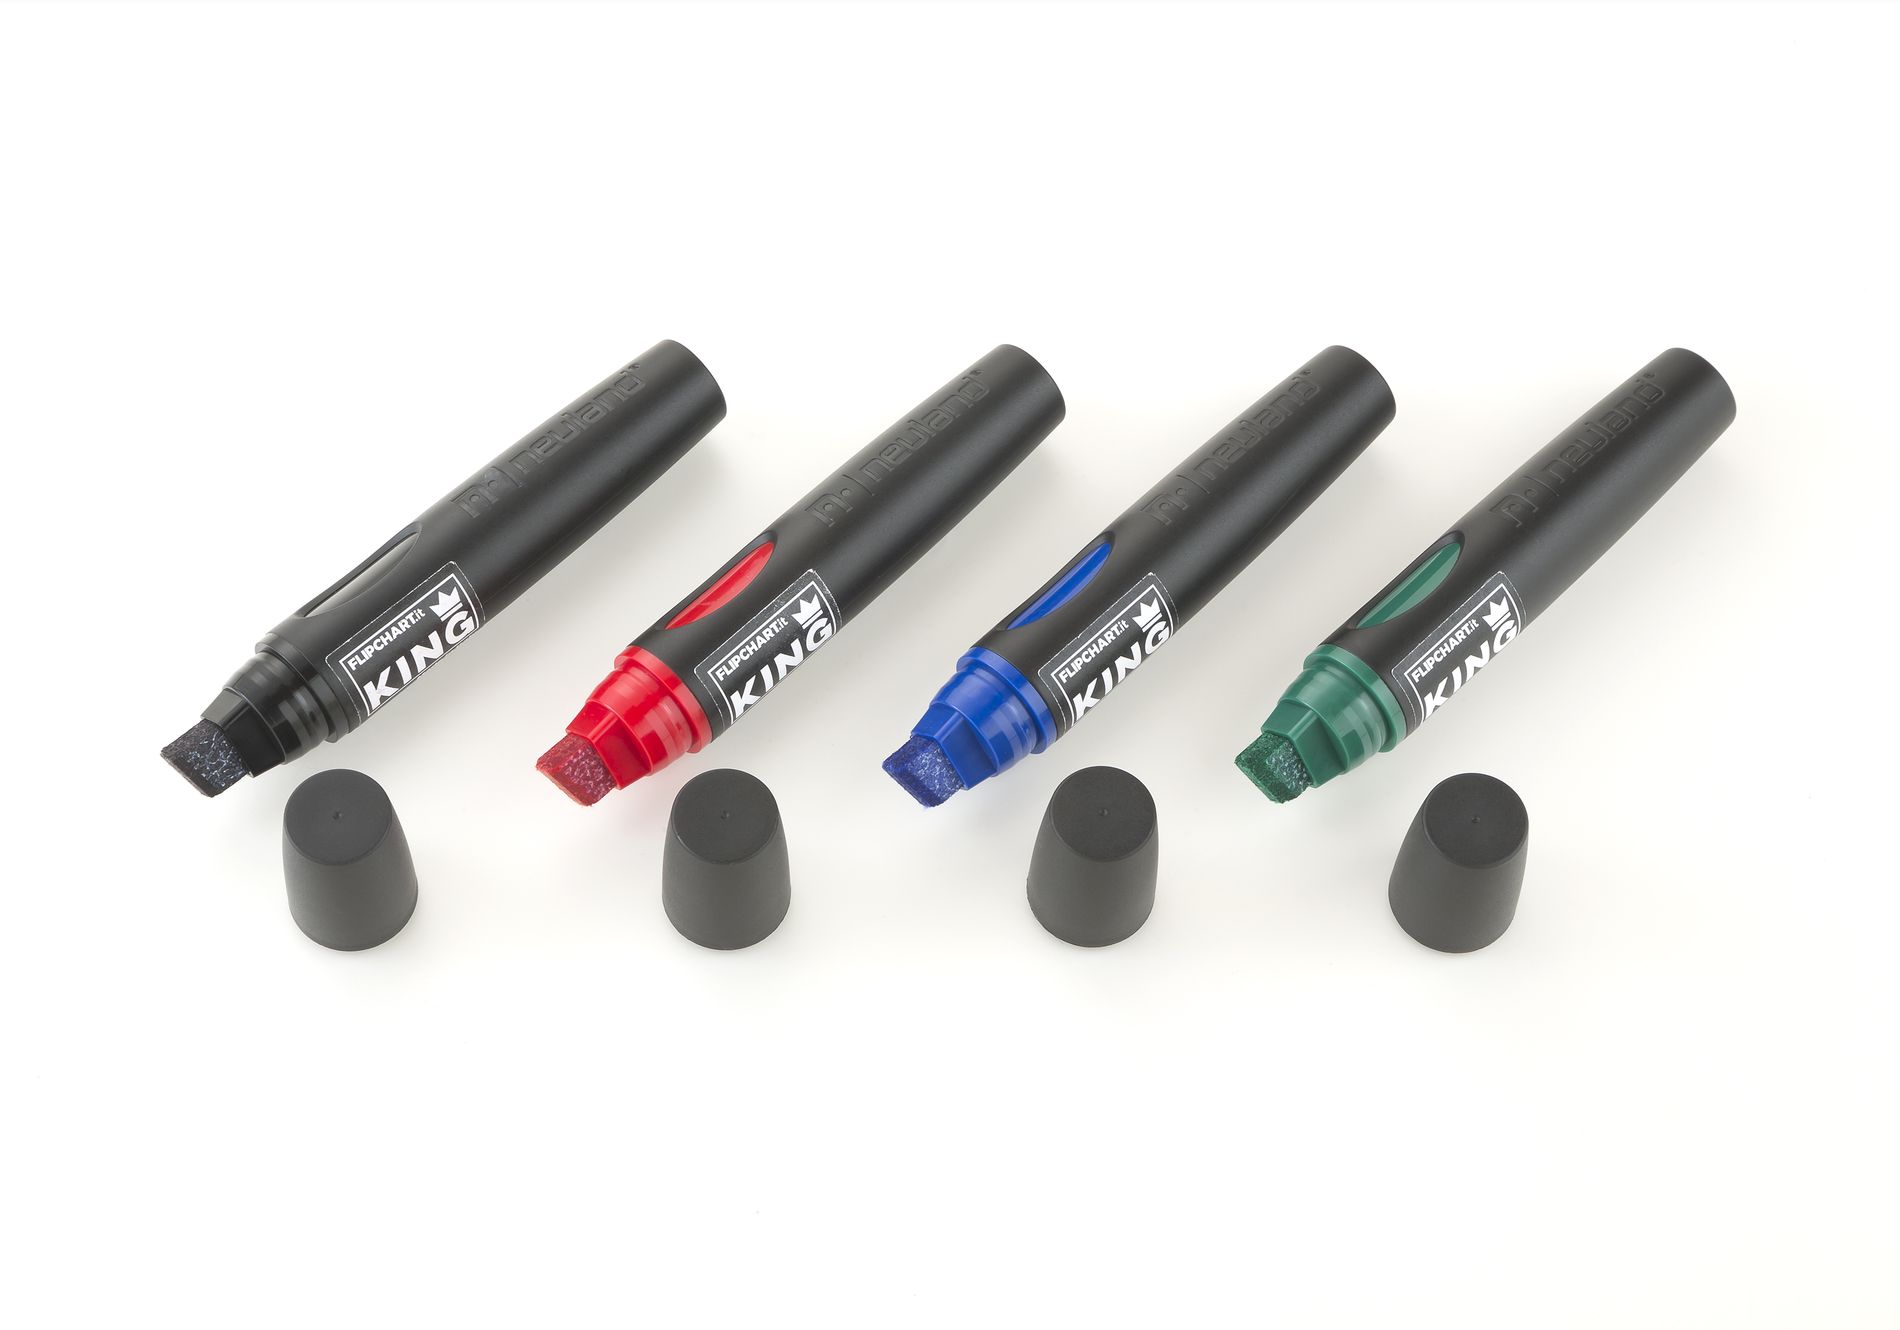 4 Magnum Size Markers: 2 Black and 2 Red for flipcharts - KING